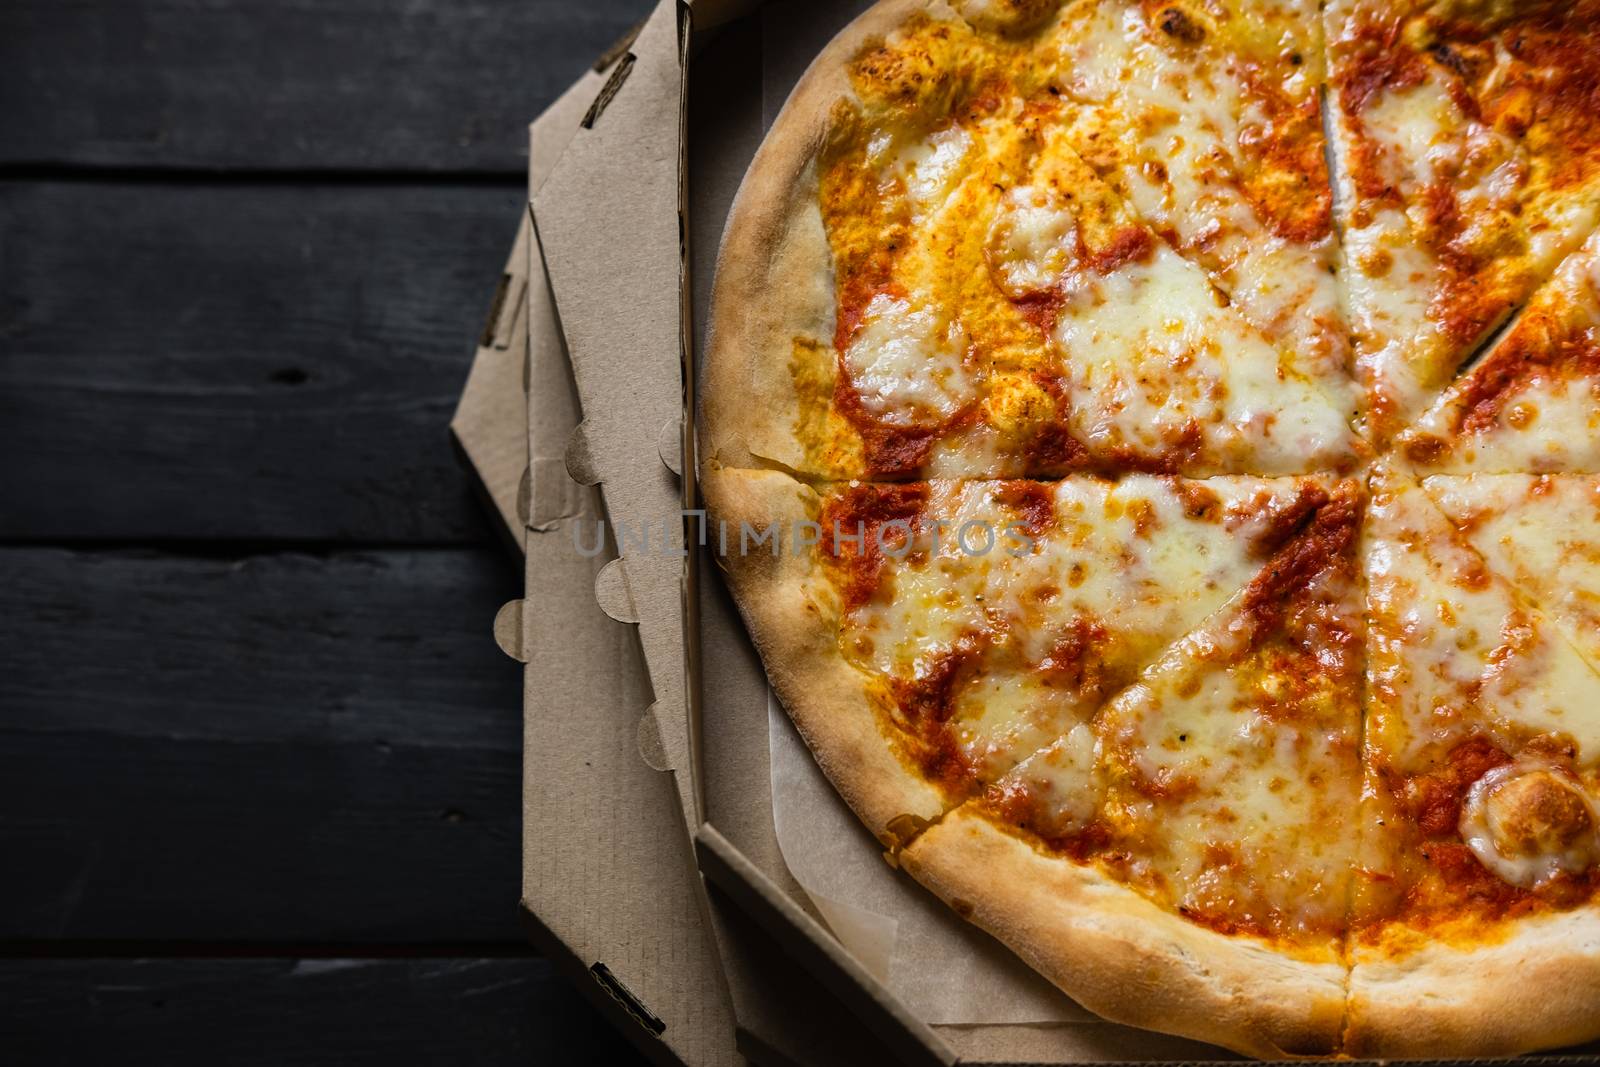 Cold pizza in a delivery box, long delivery times, wasted fast food concept. Italian pizza margherita with dry crust and sauce, delayed or failed food delivery service